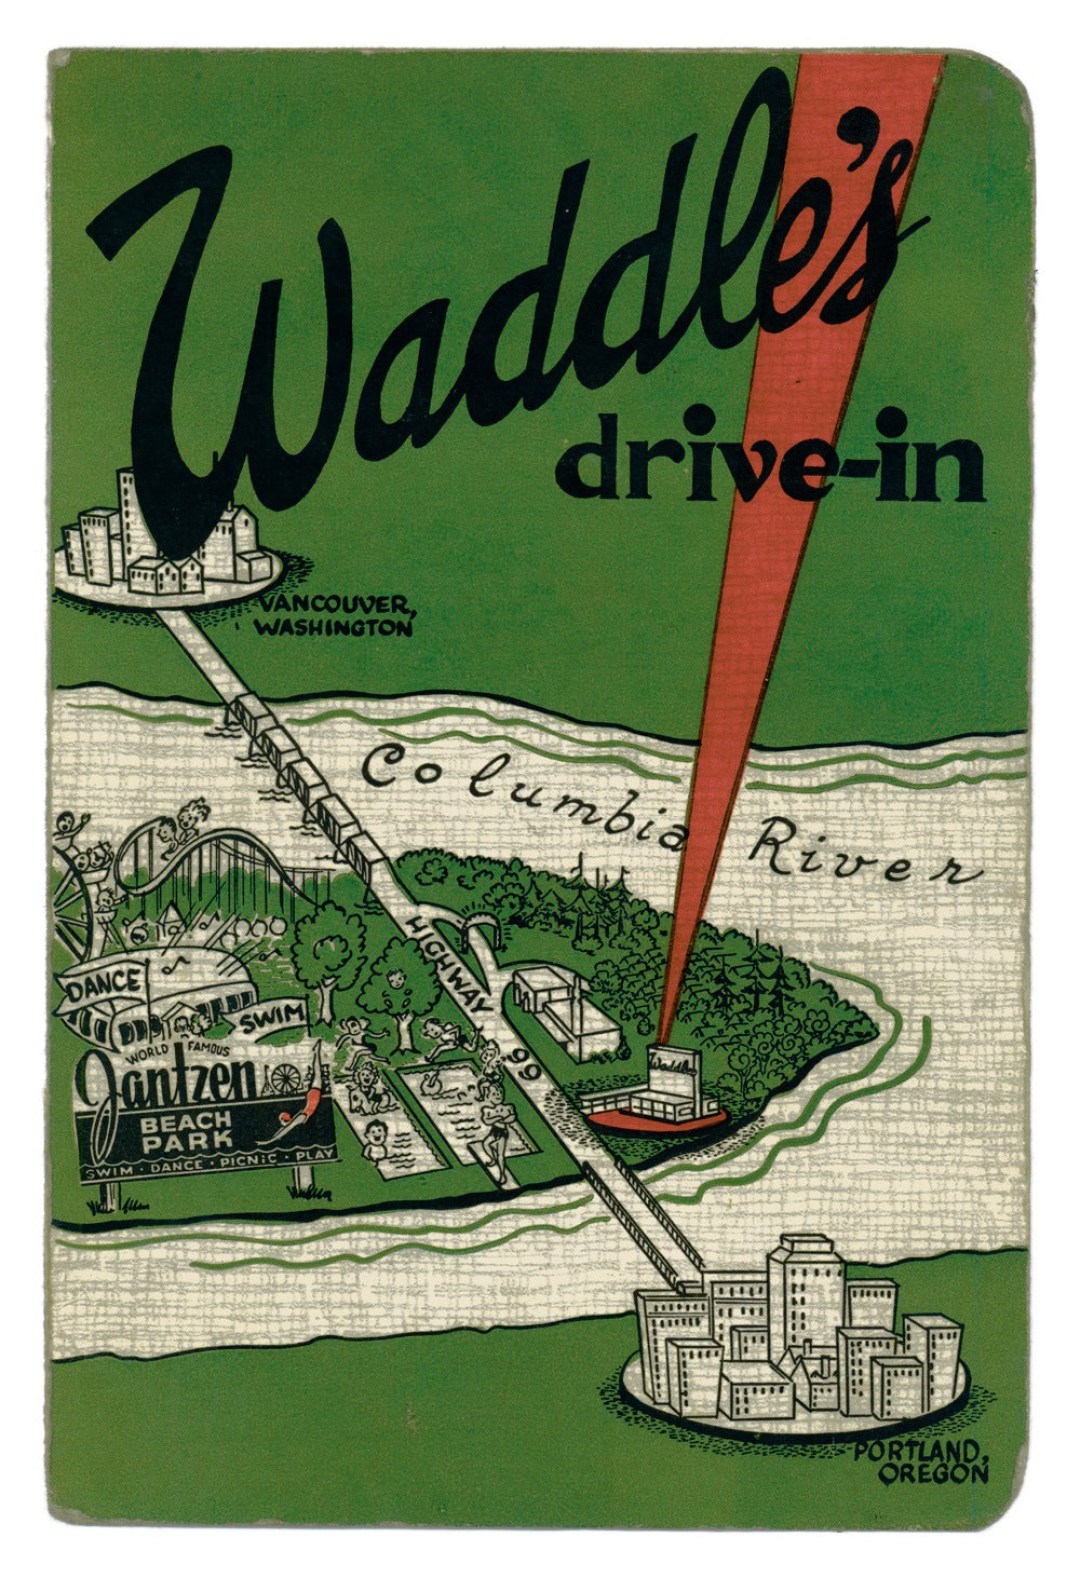 Picture of: Waddle’s Drive-In, Portland, Oregon,